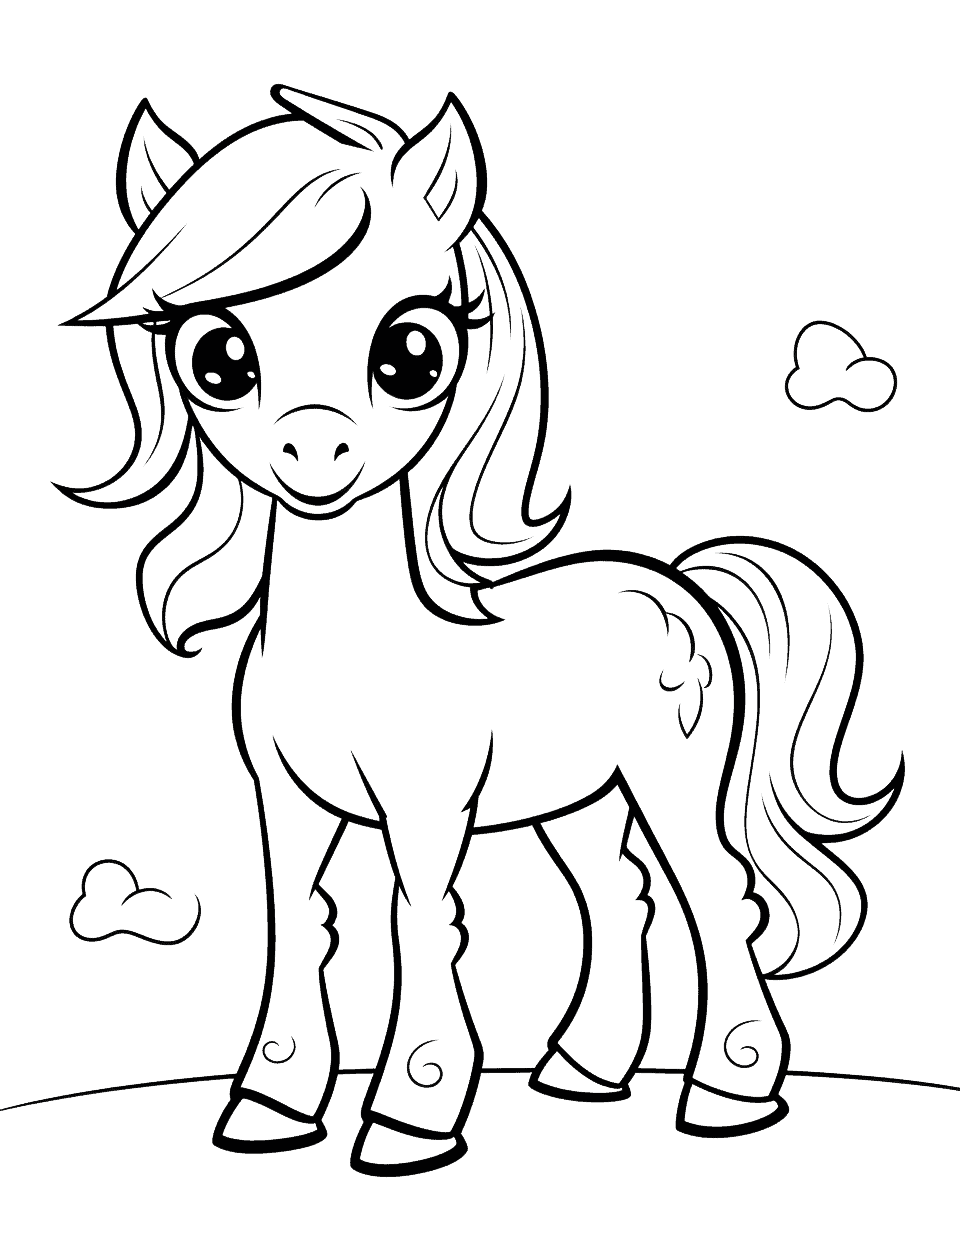 Kawaii Pony Horse Coloring Page - A super cute, kawaii-style pony with big sparkling eyes.